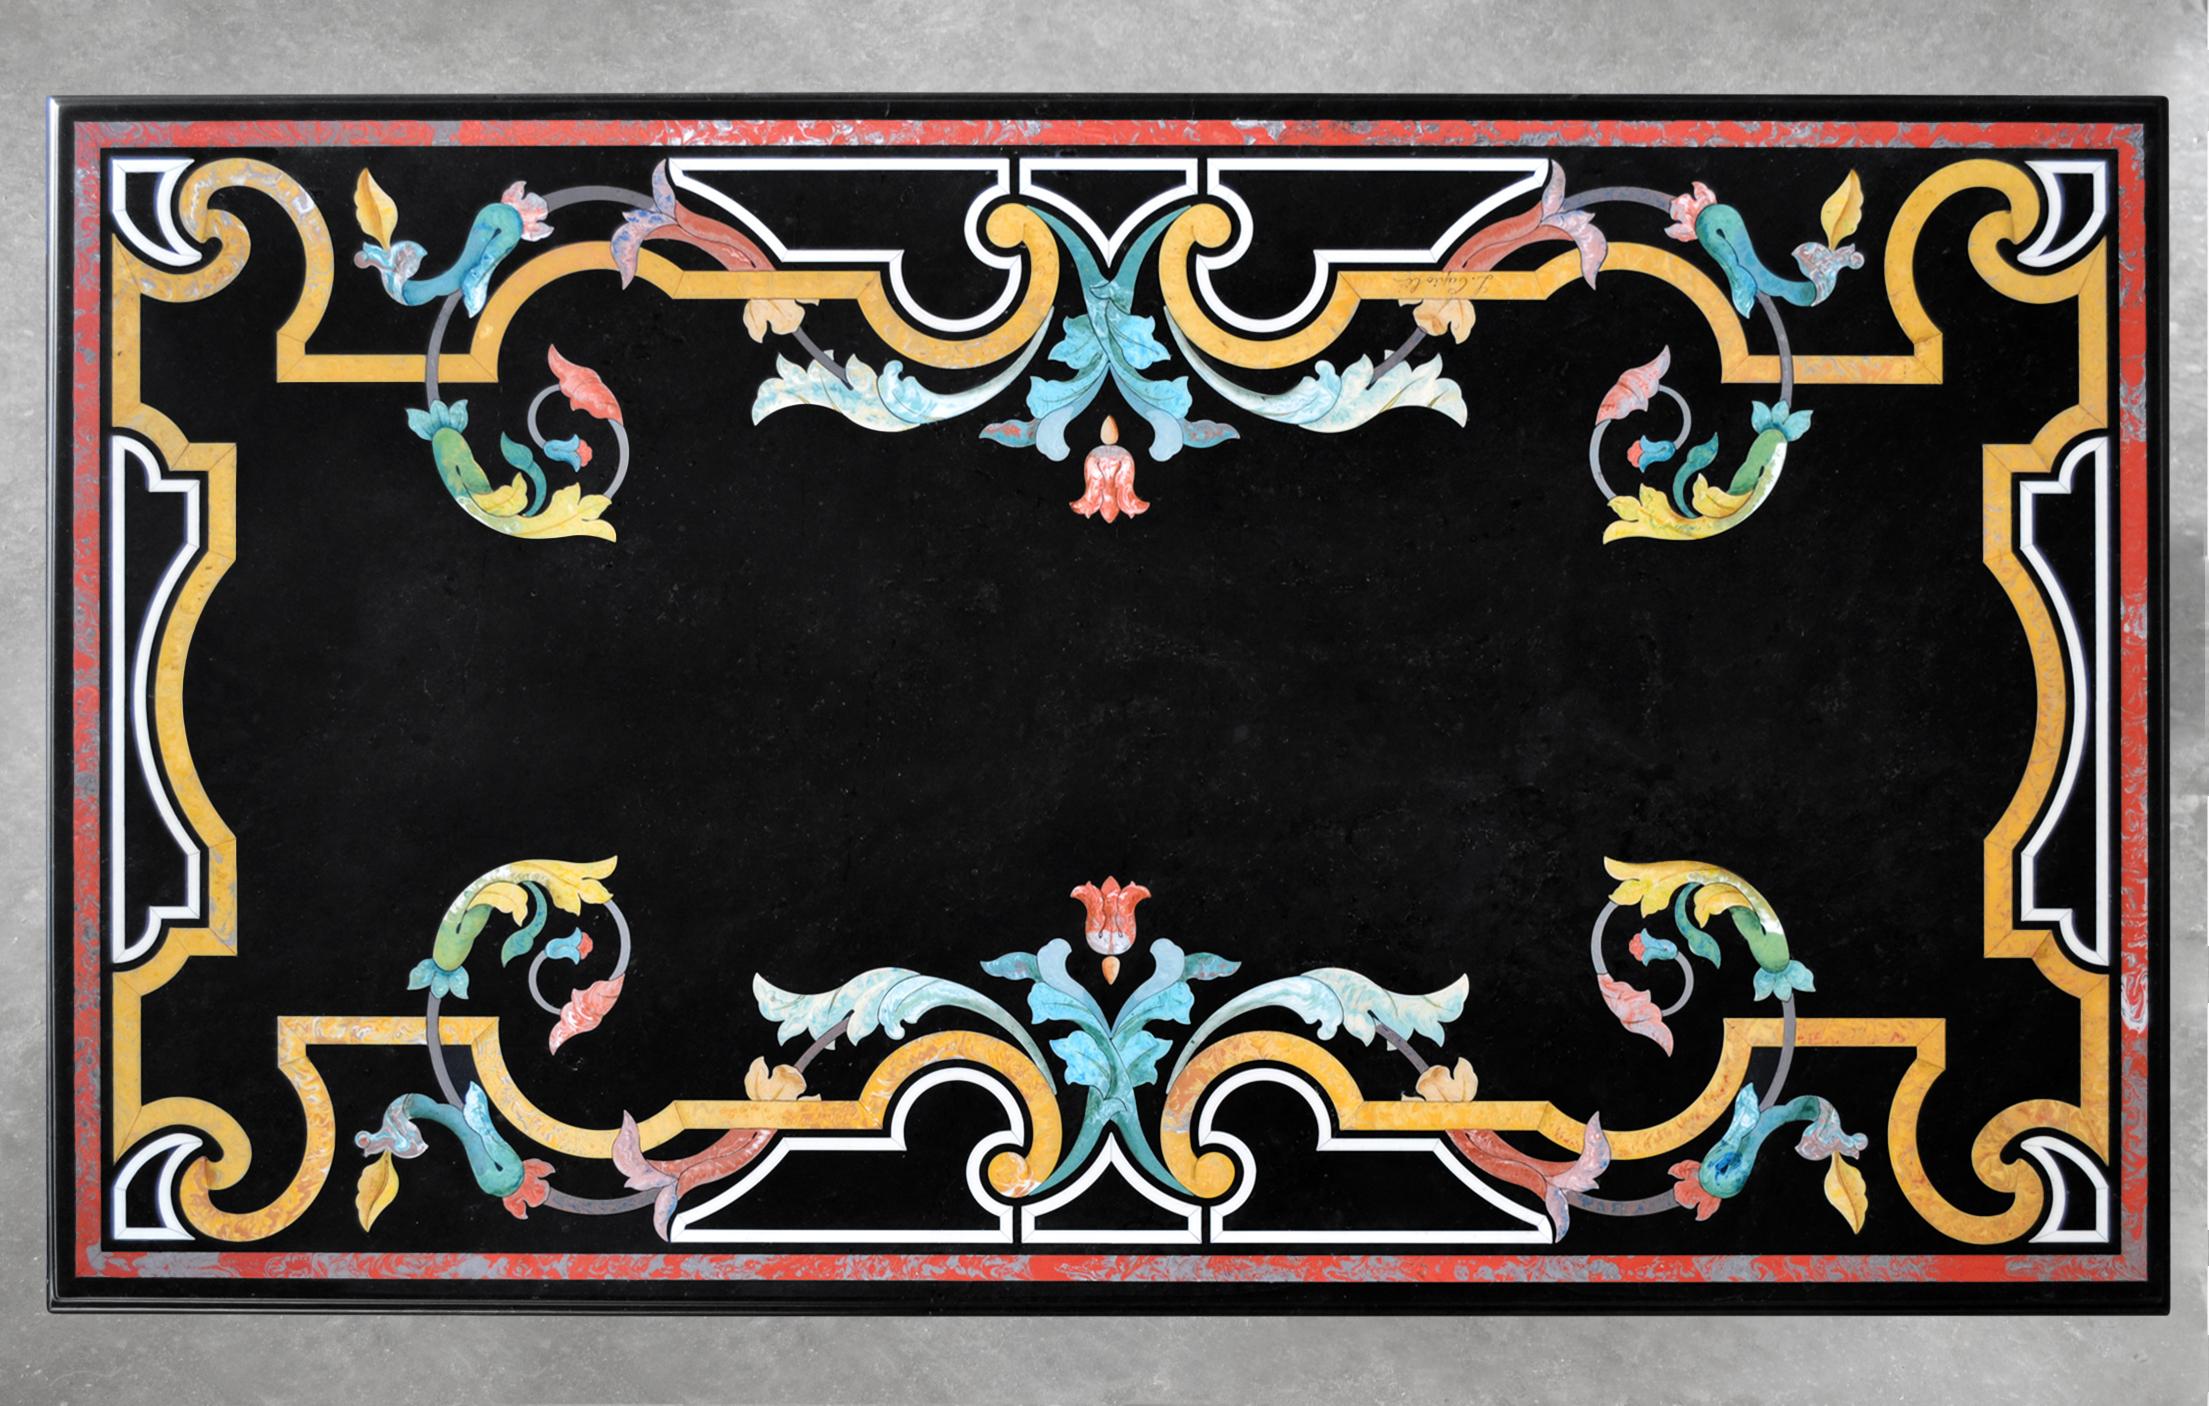 Coffee table made with the decorative technique of 'scagliola inlay on a Black marble top, which rests on a black lacquered wooden base with a trapezoidal shape.
Le capacità  artistic  vengono messe a disposizione  to create art pieces that become